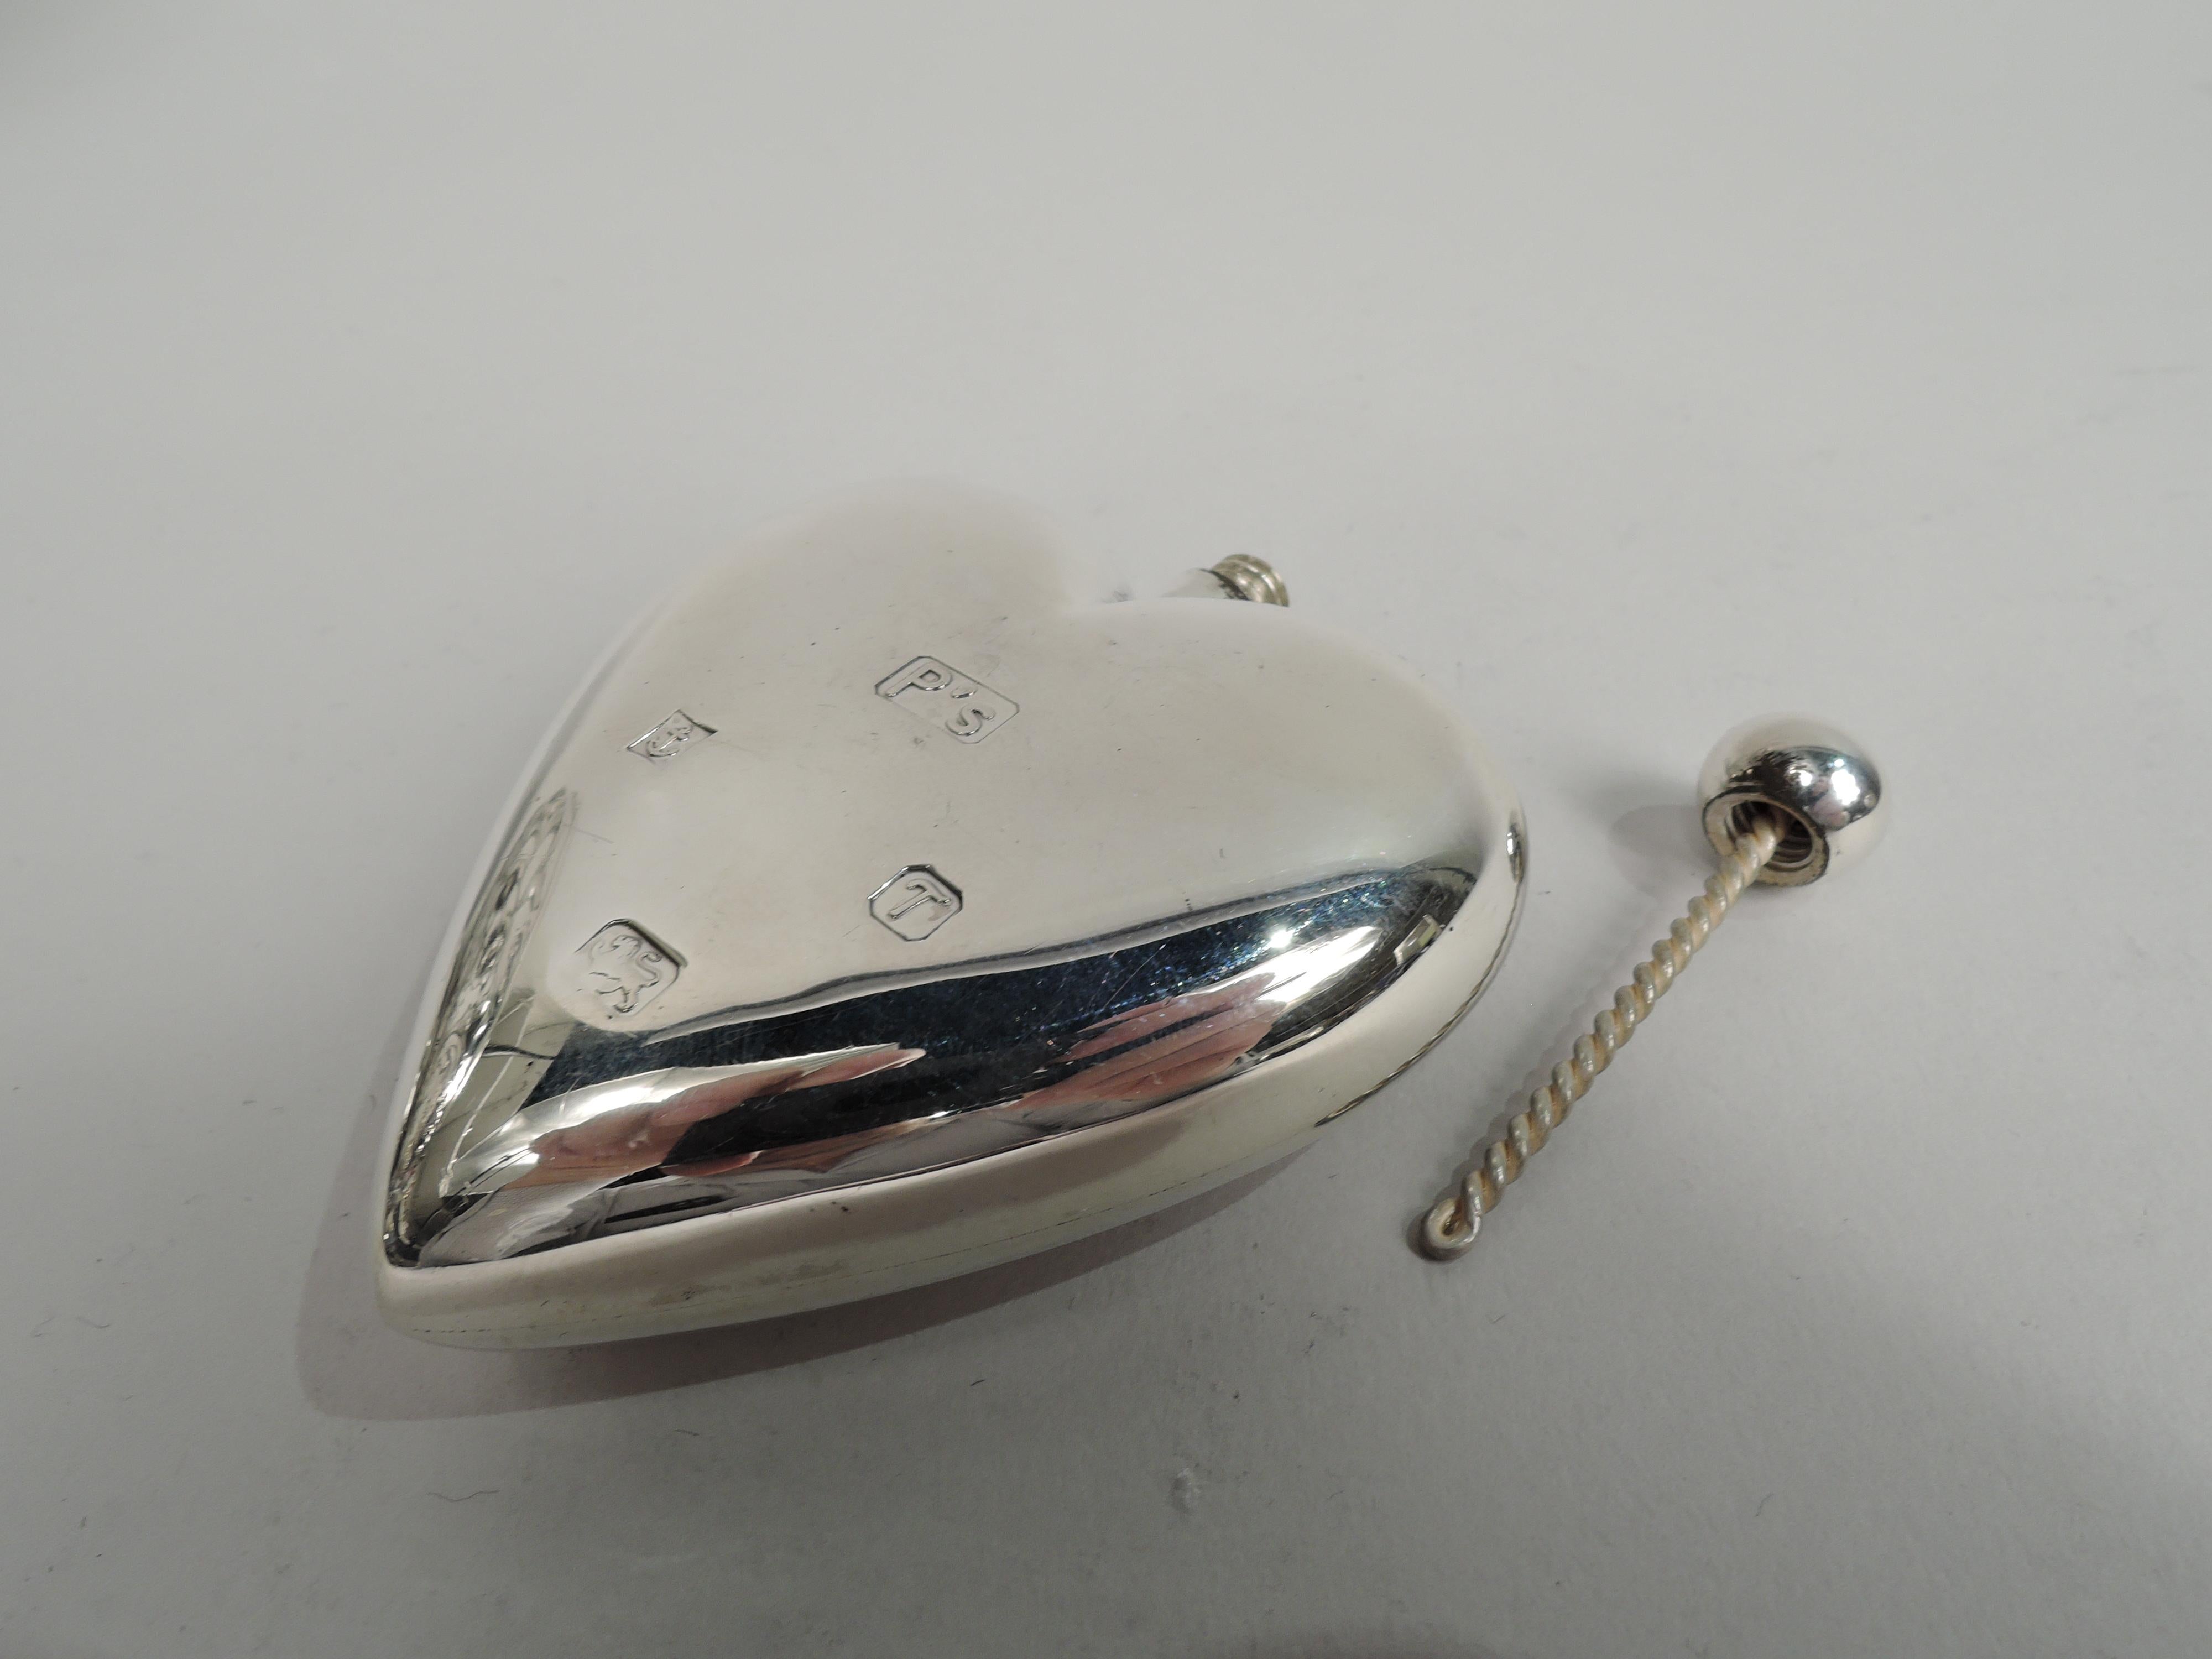 Modern Old-Fashioned English Sterling Silver Heart-Shaped Perfume